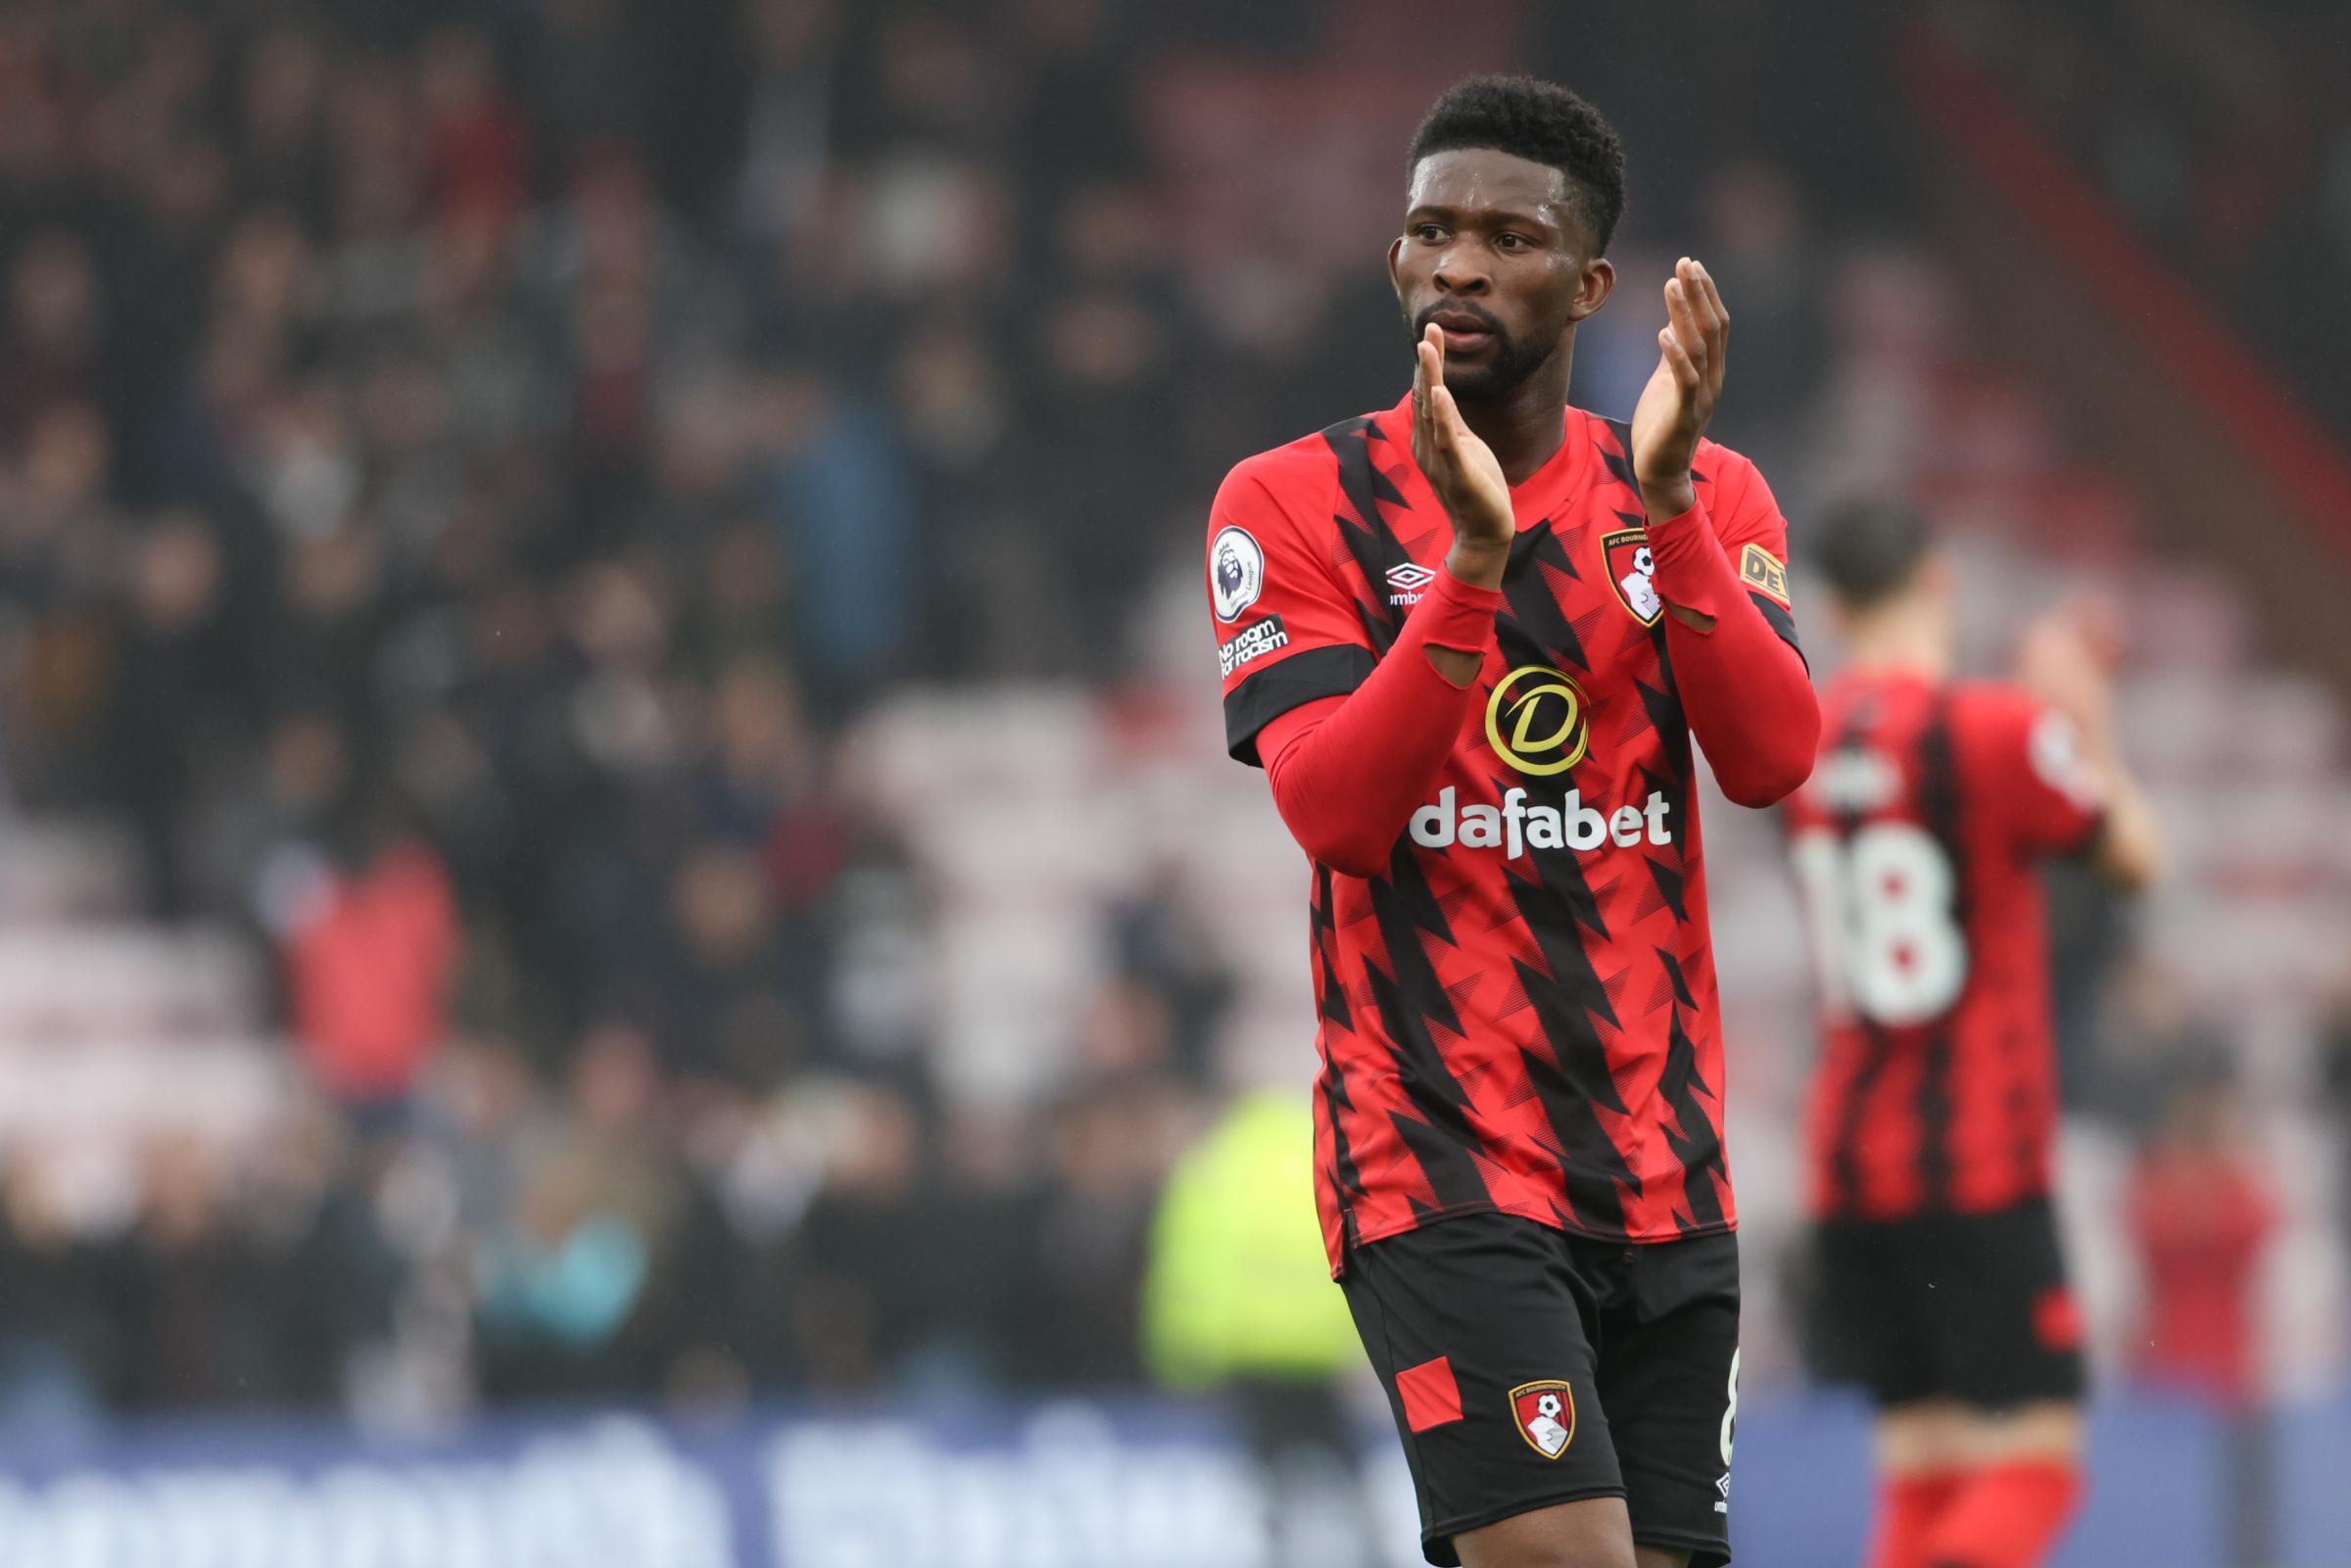 AFC Bournemouth's Jefferson Lerma undecided on future as clubs circle